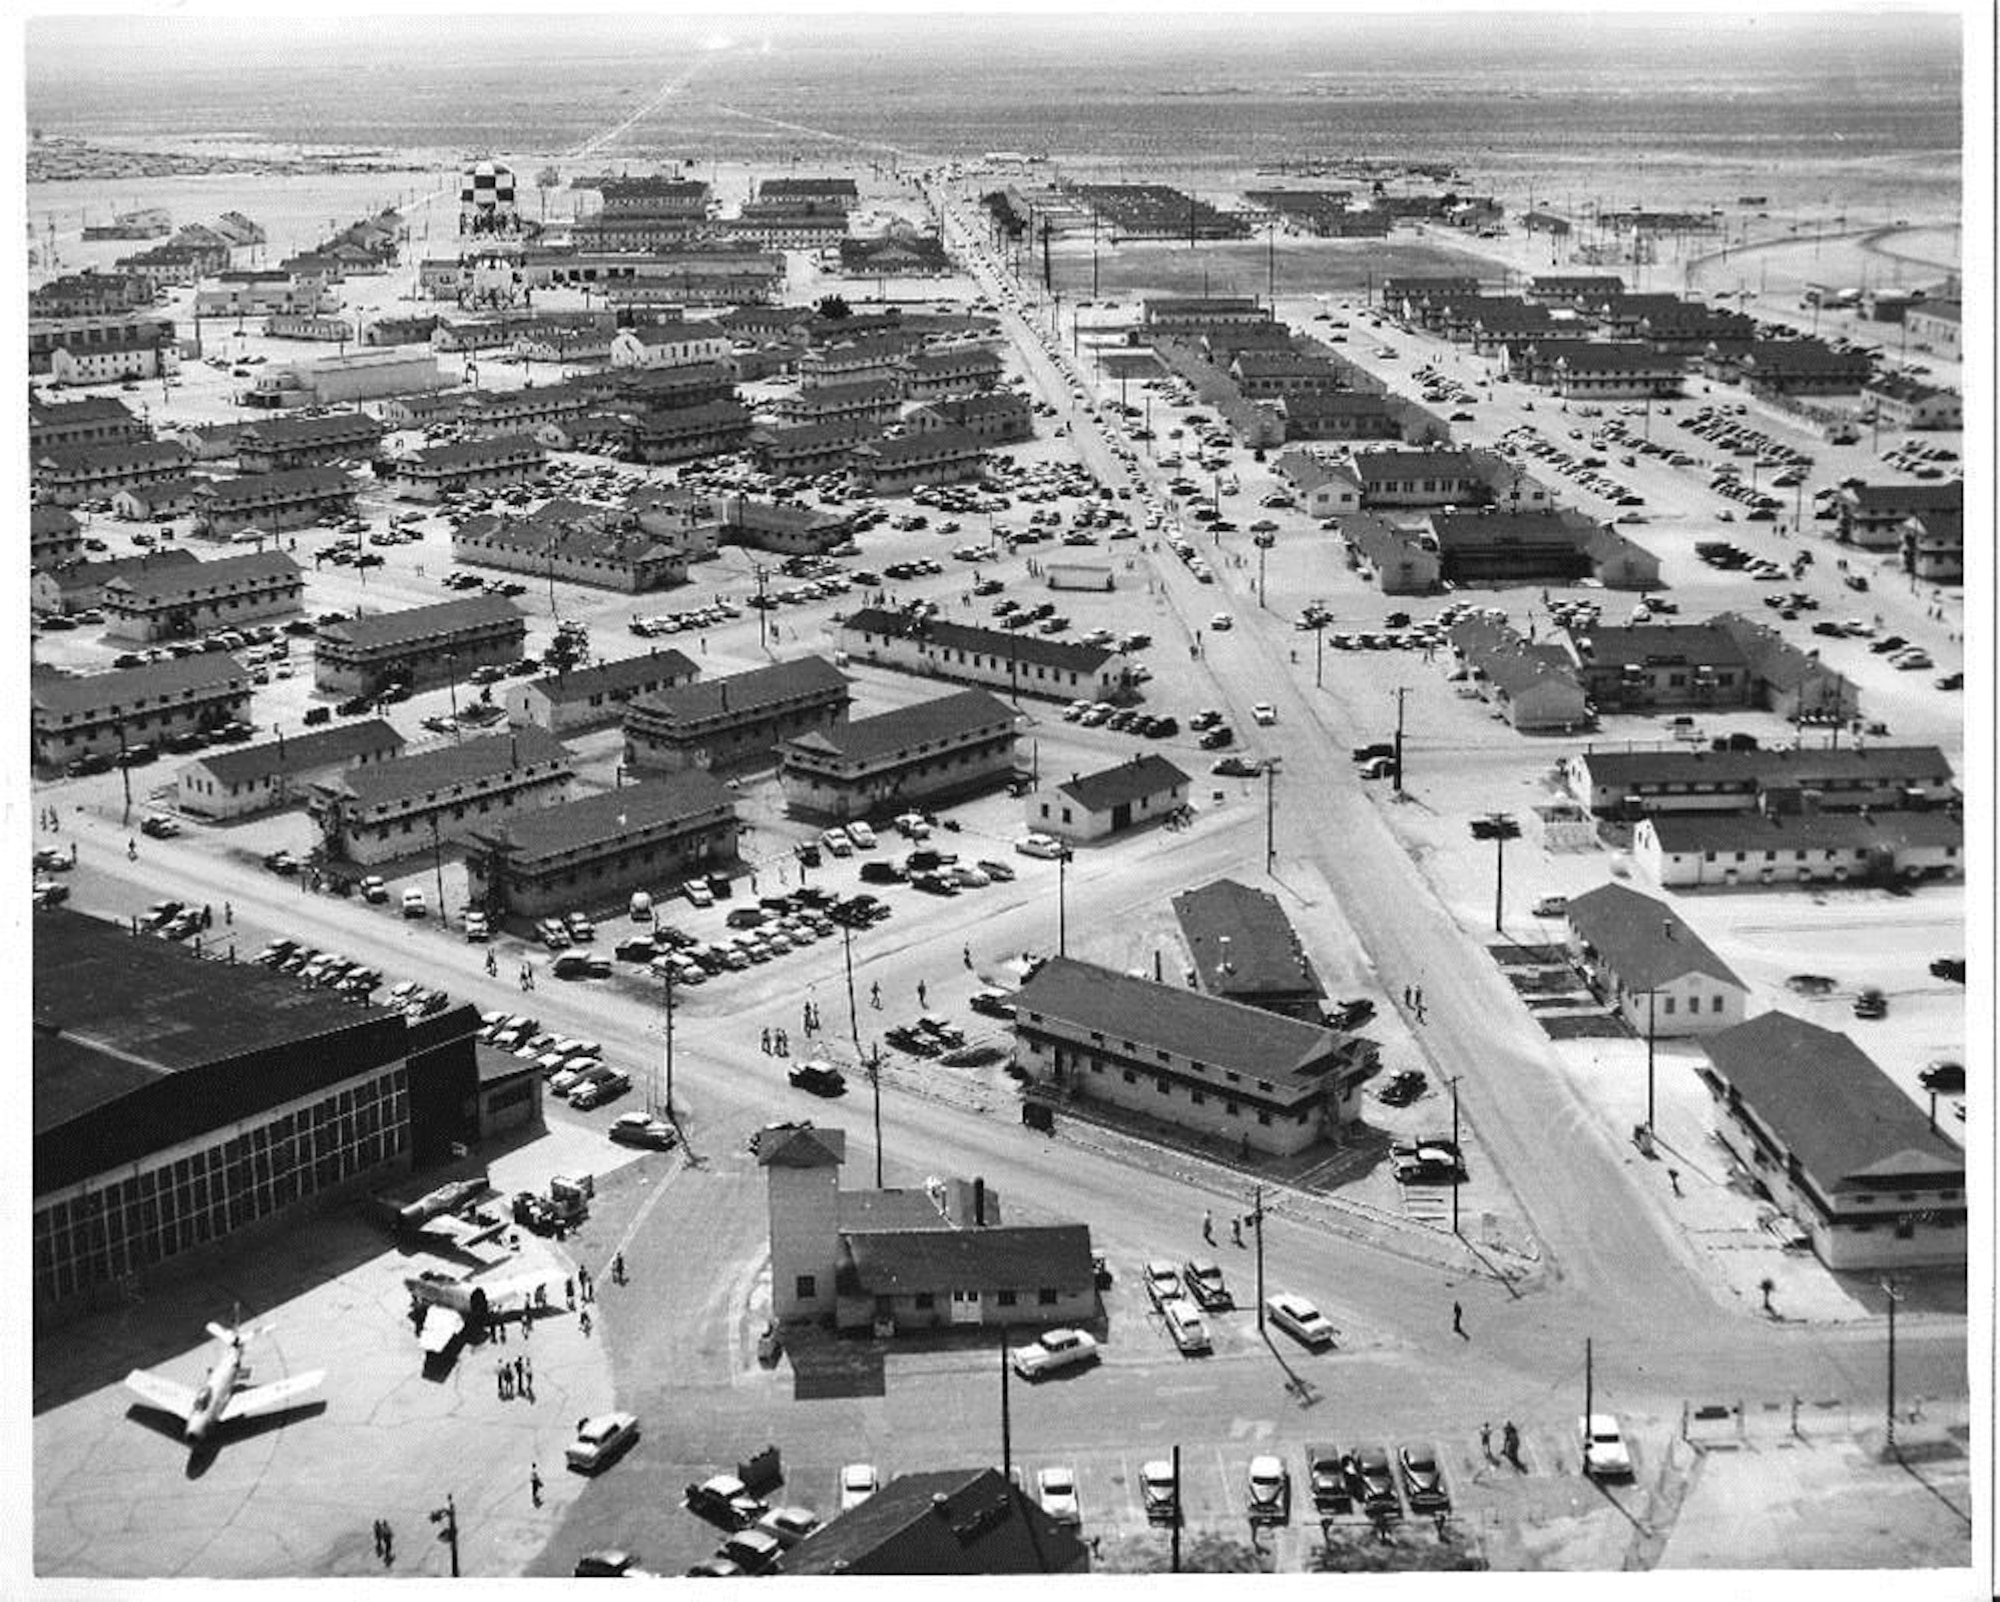 At the end of the Korean War, Nellis Air Force Base had expanded exponentially since its pre-World War II days, as seen here in 1956. The base, which was renamed to Nellis AFB in 1950, is coming up on its 75th anniversary in 2016. (Courtesy photo)